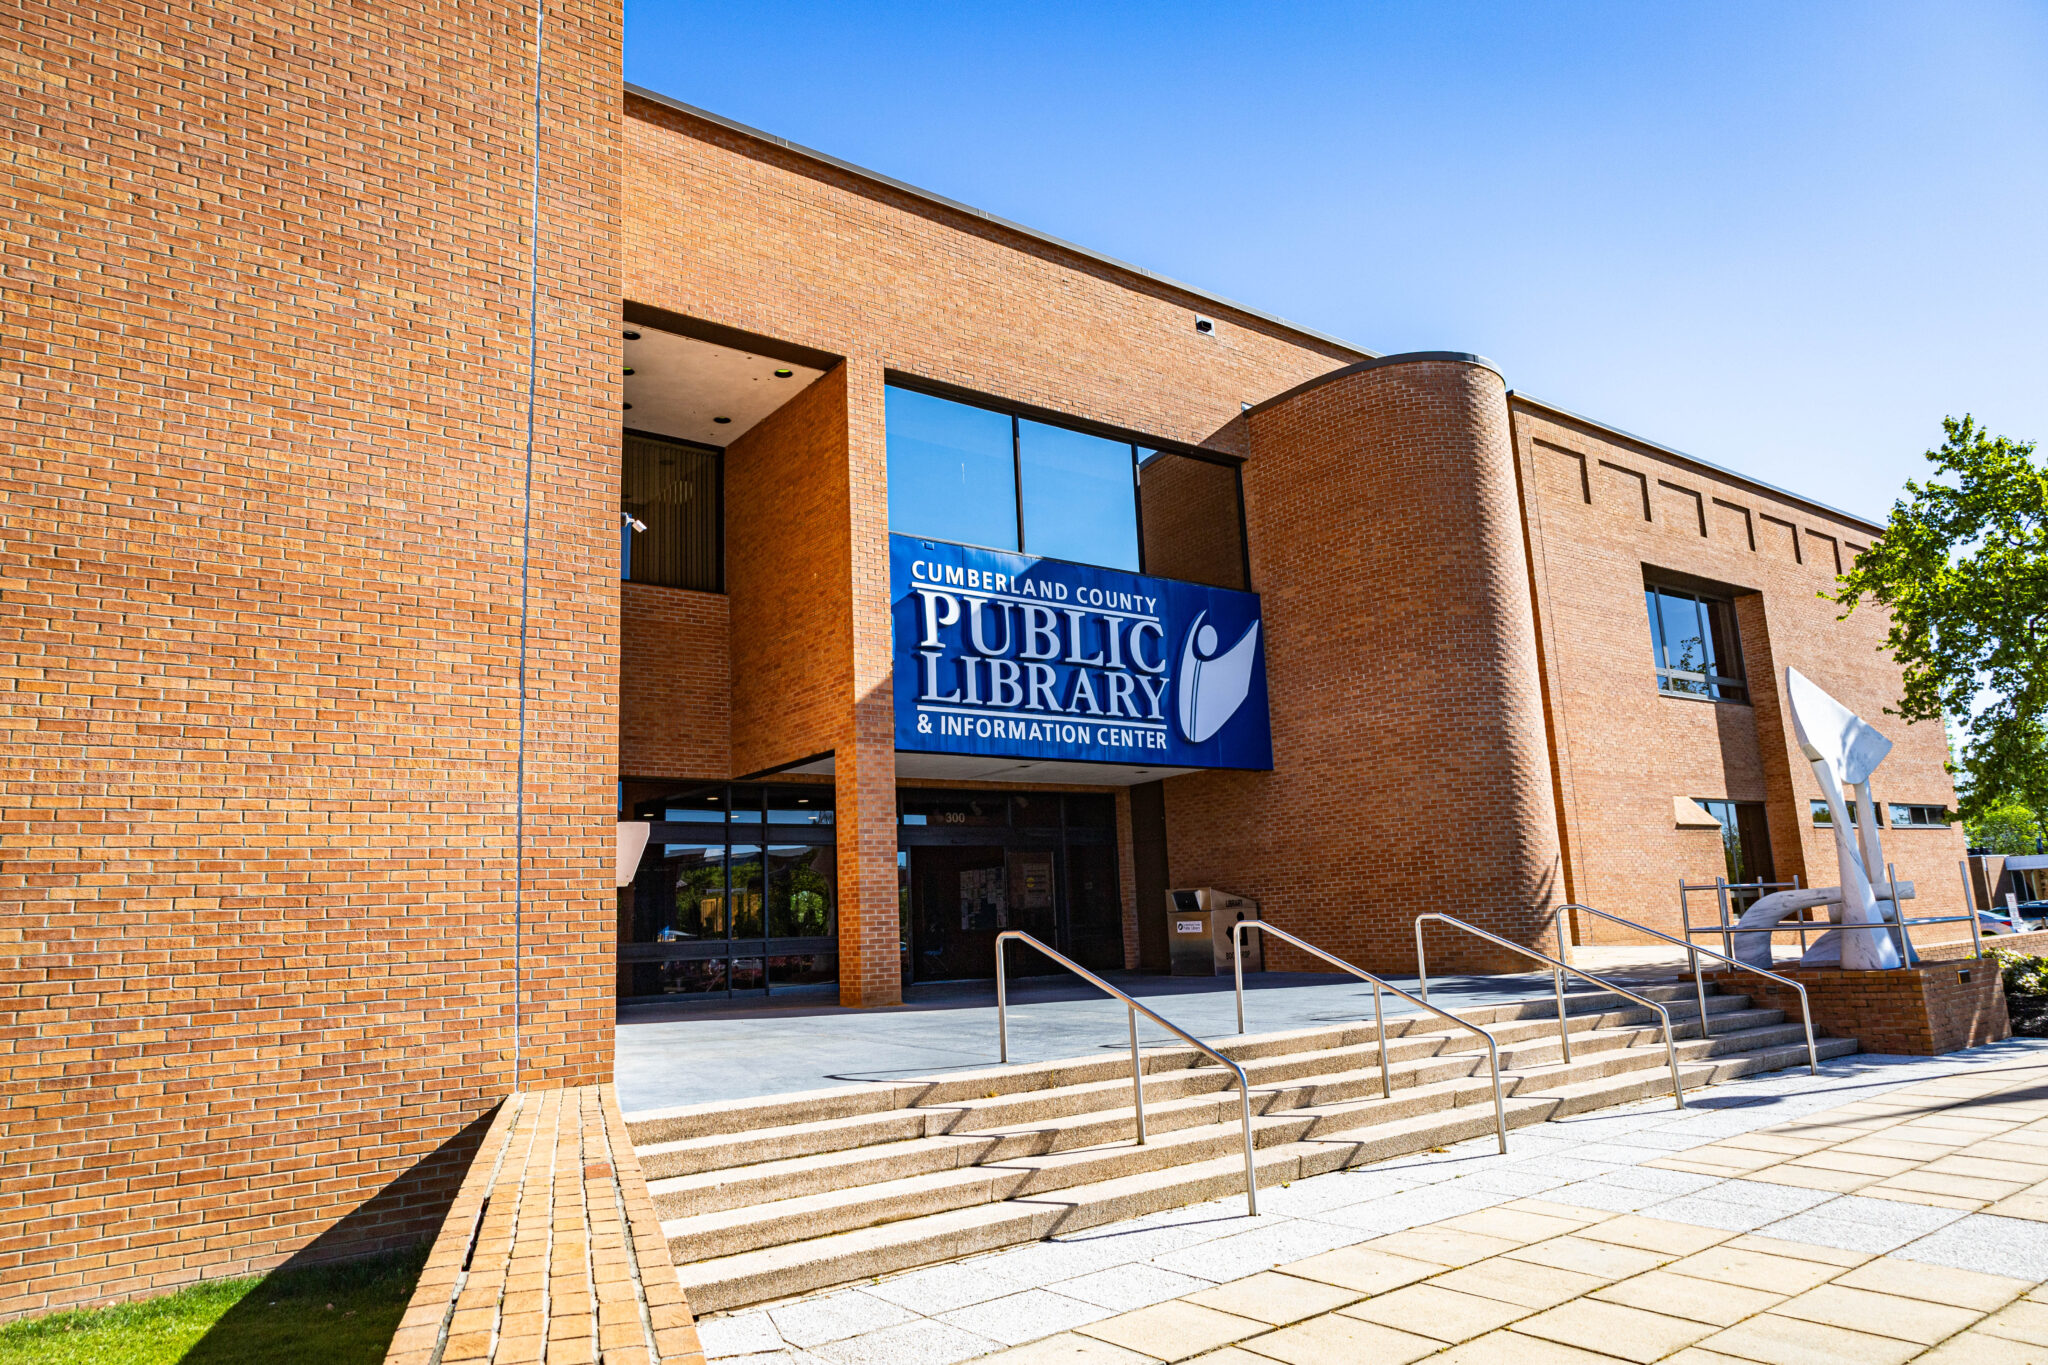 Exterior of library is brick and features a blue banner